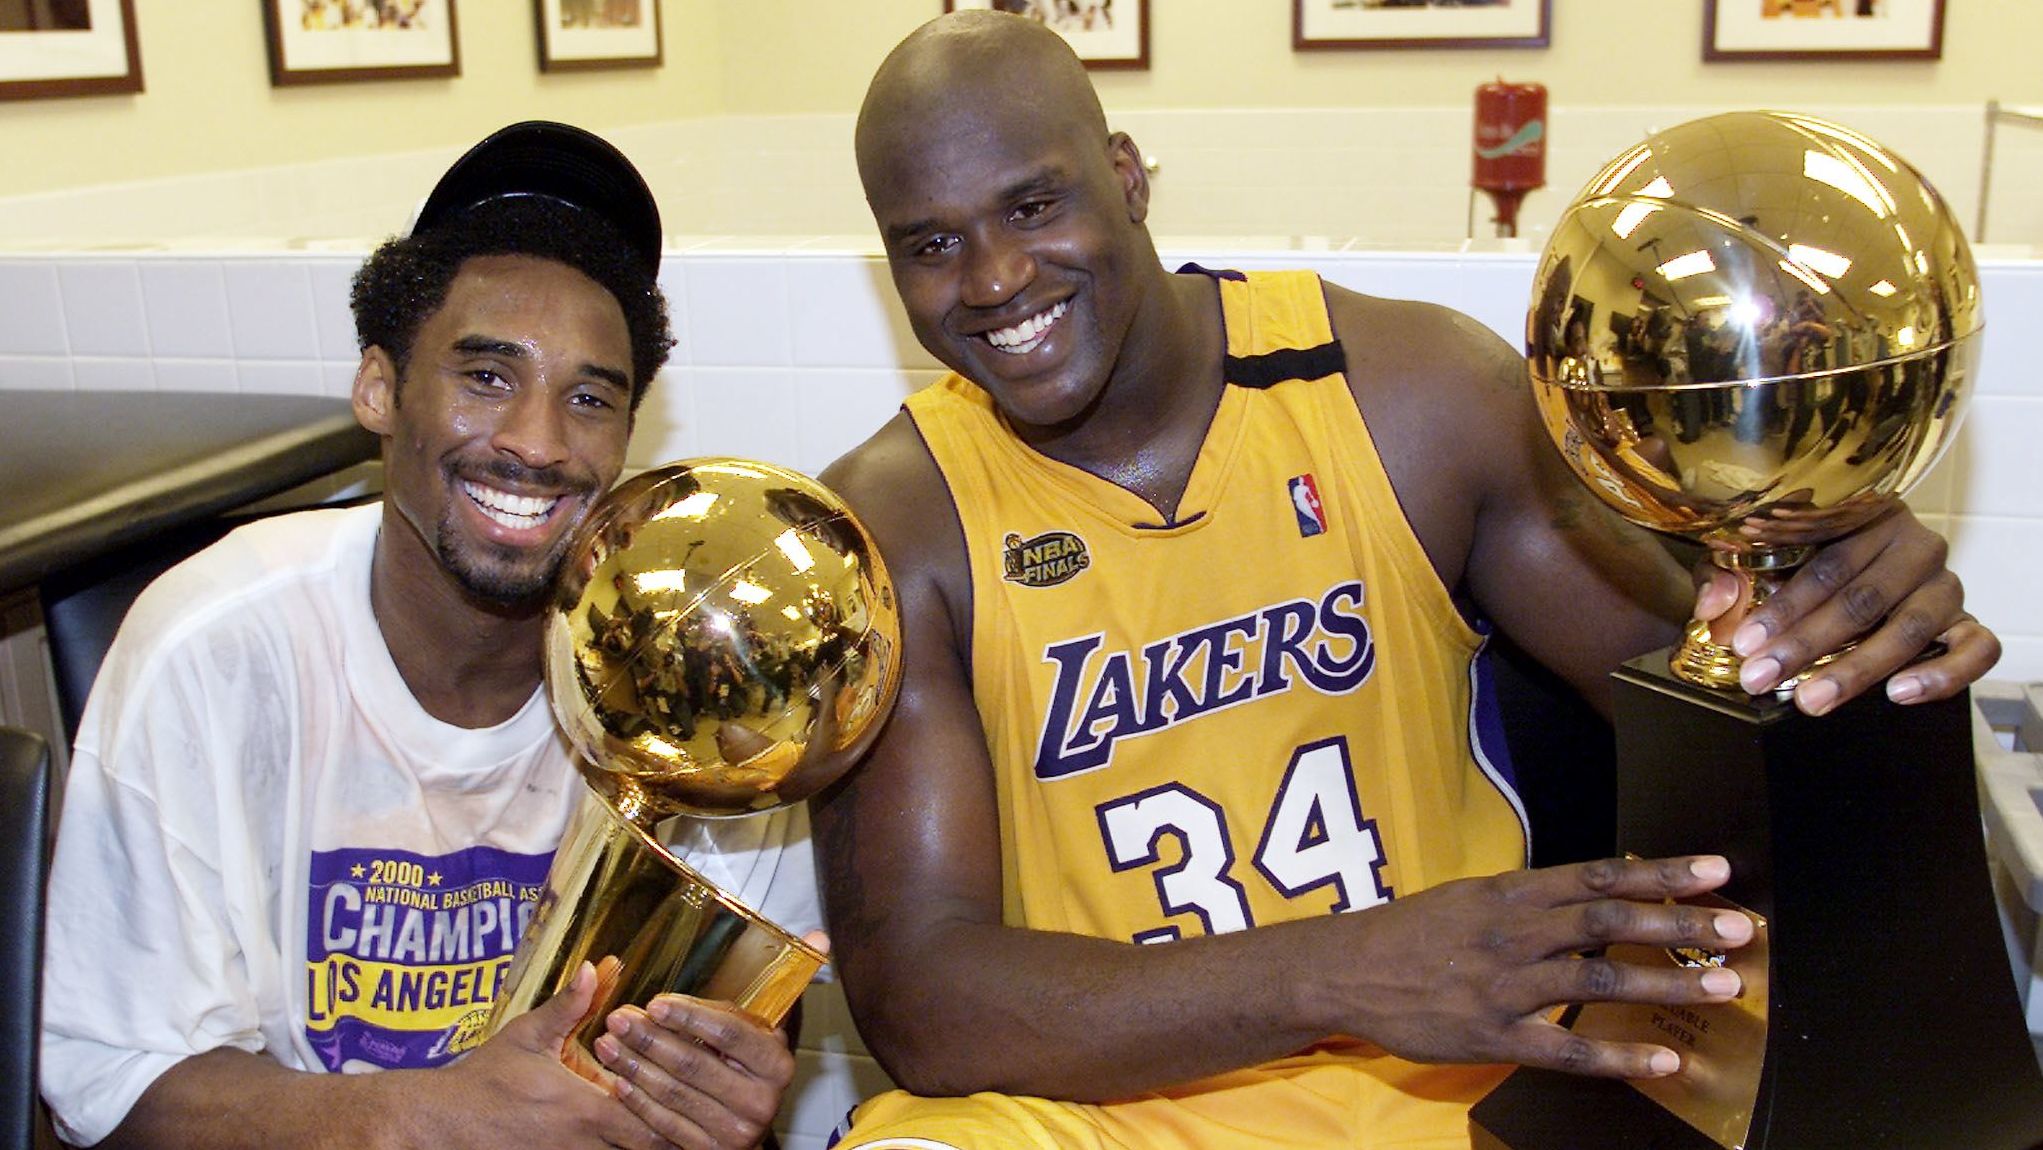 Vlek kat mannetje Kobe Bryant thinks Shaq should've worked harder on the Lakers, reigniting a  15-year-old beef | CNN